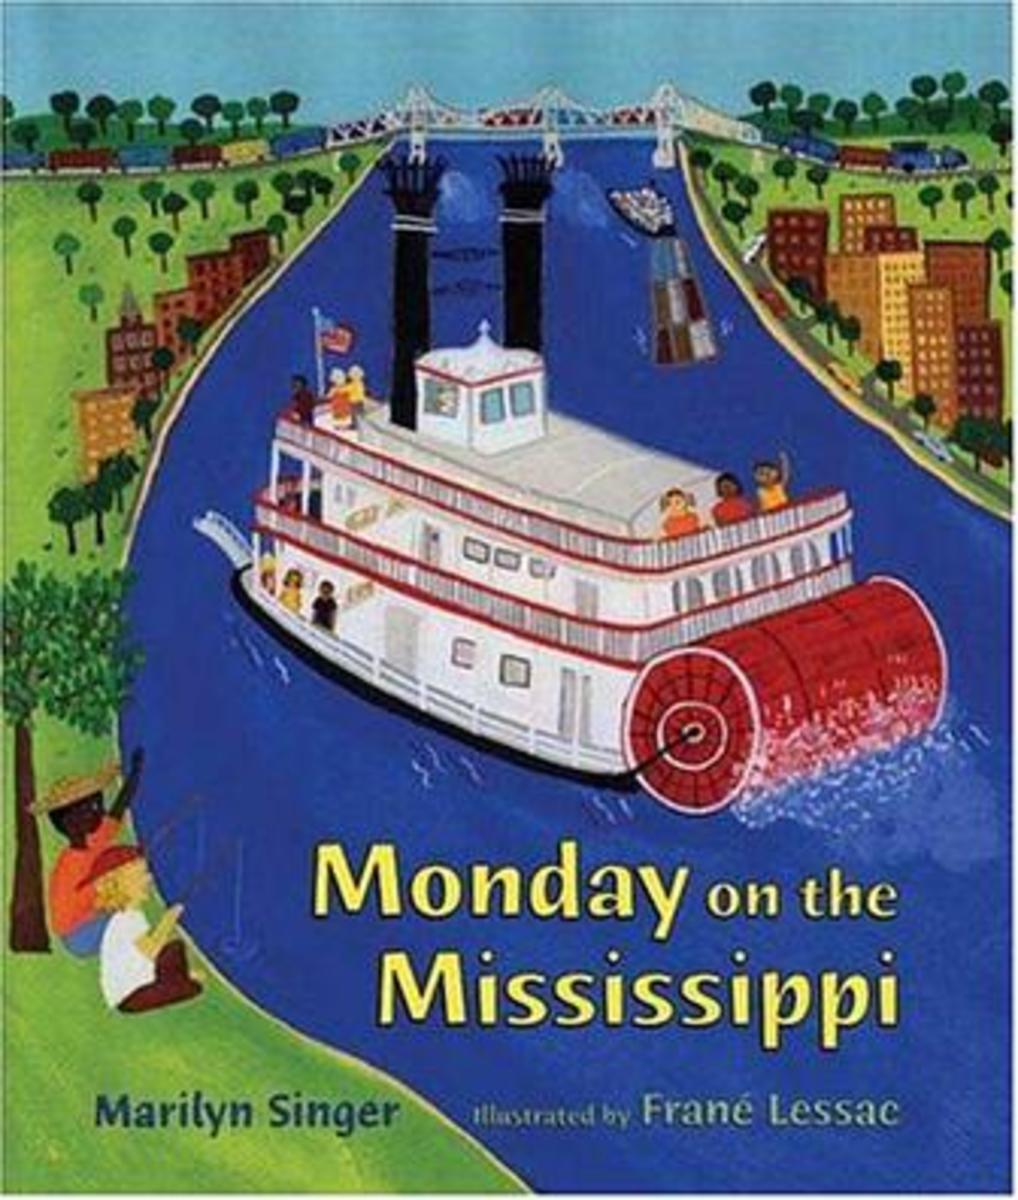 Monday on the Mississippi by Marilyn Singer 